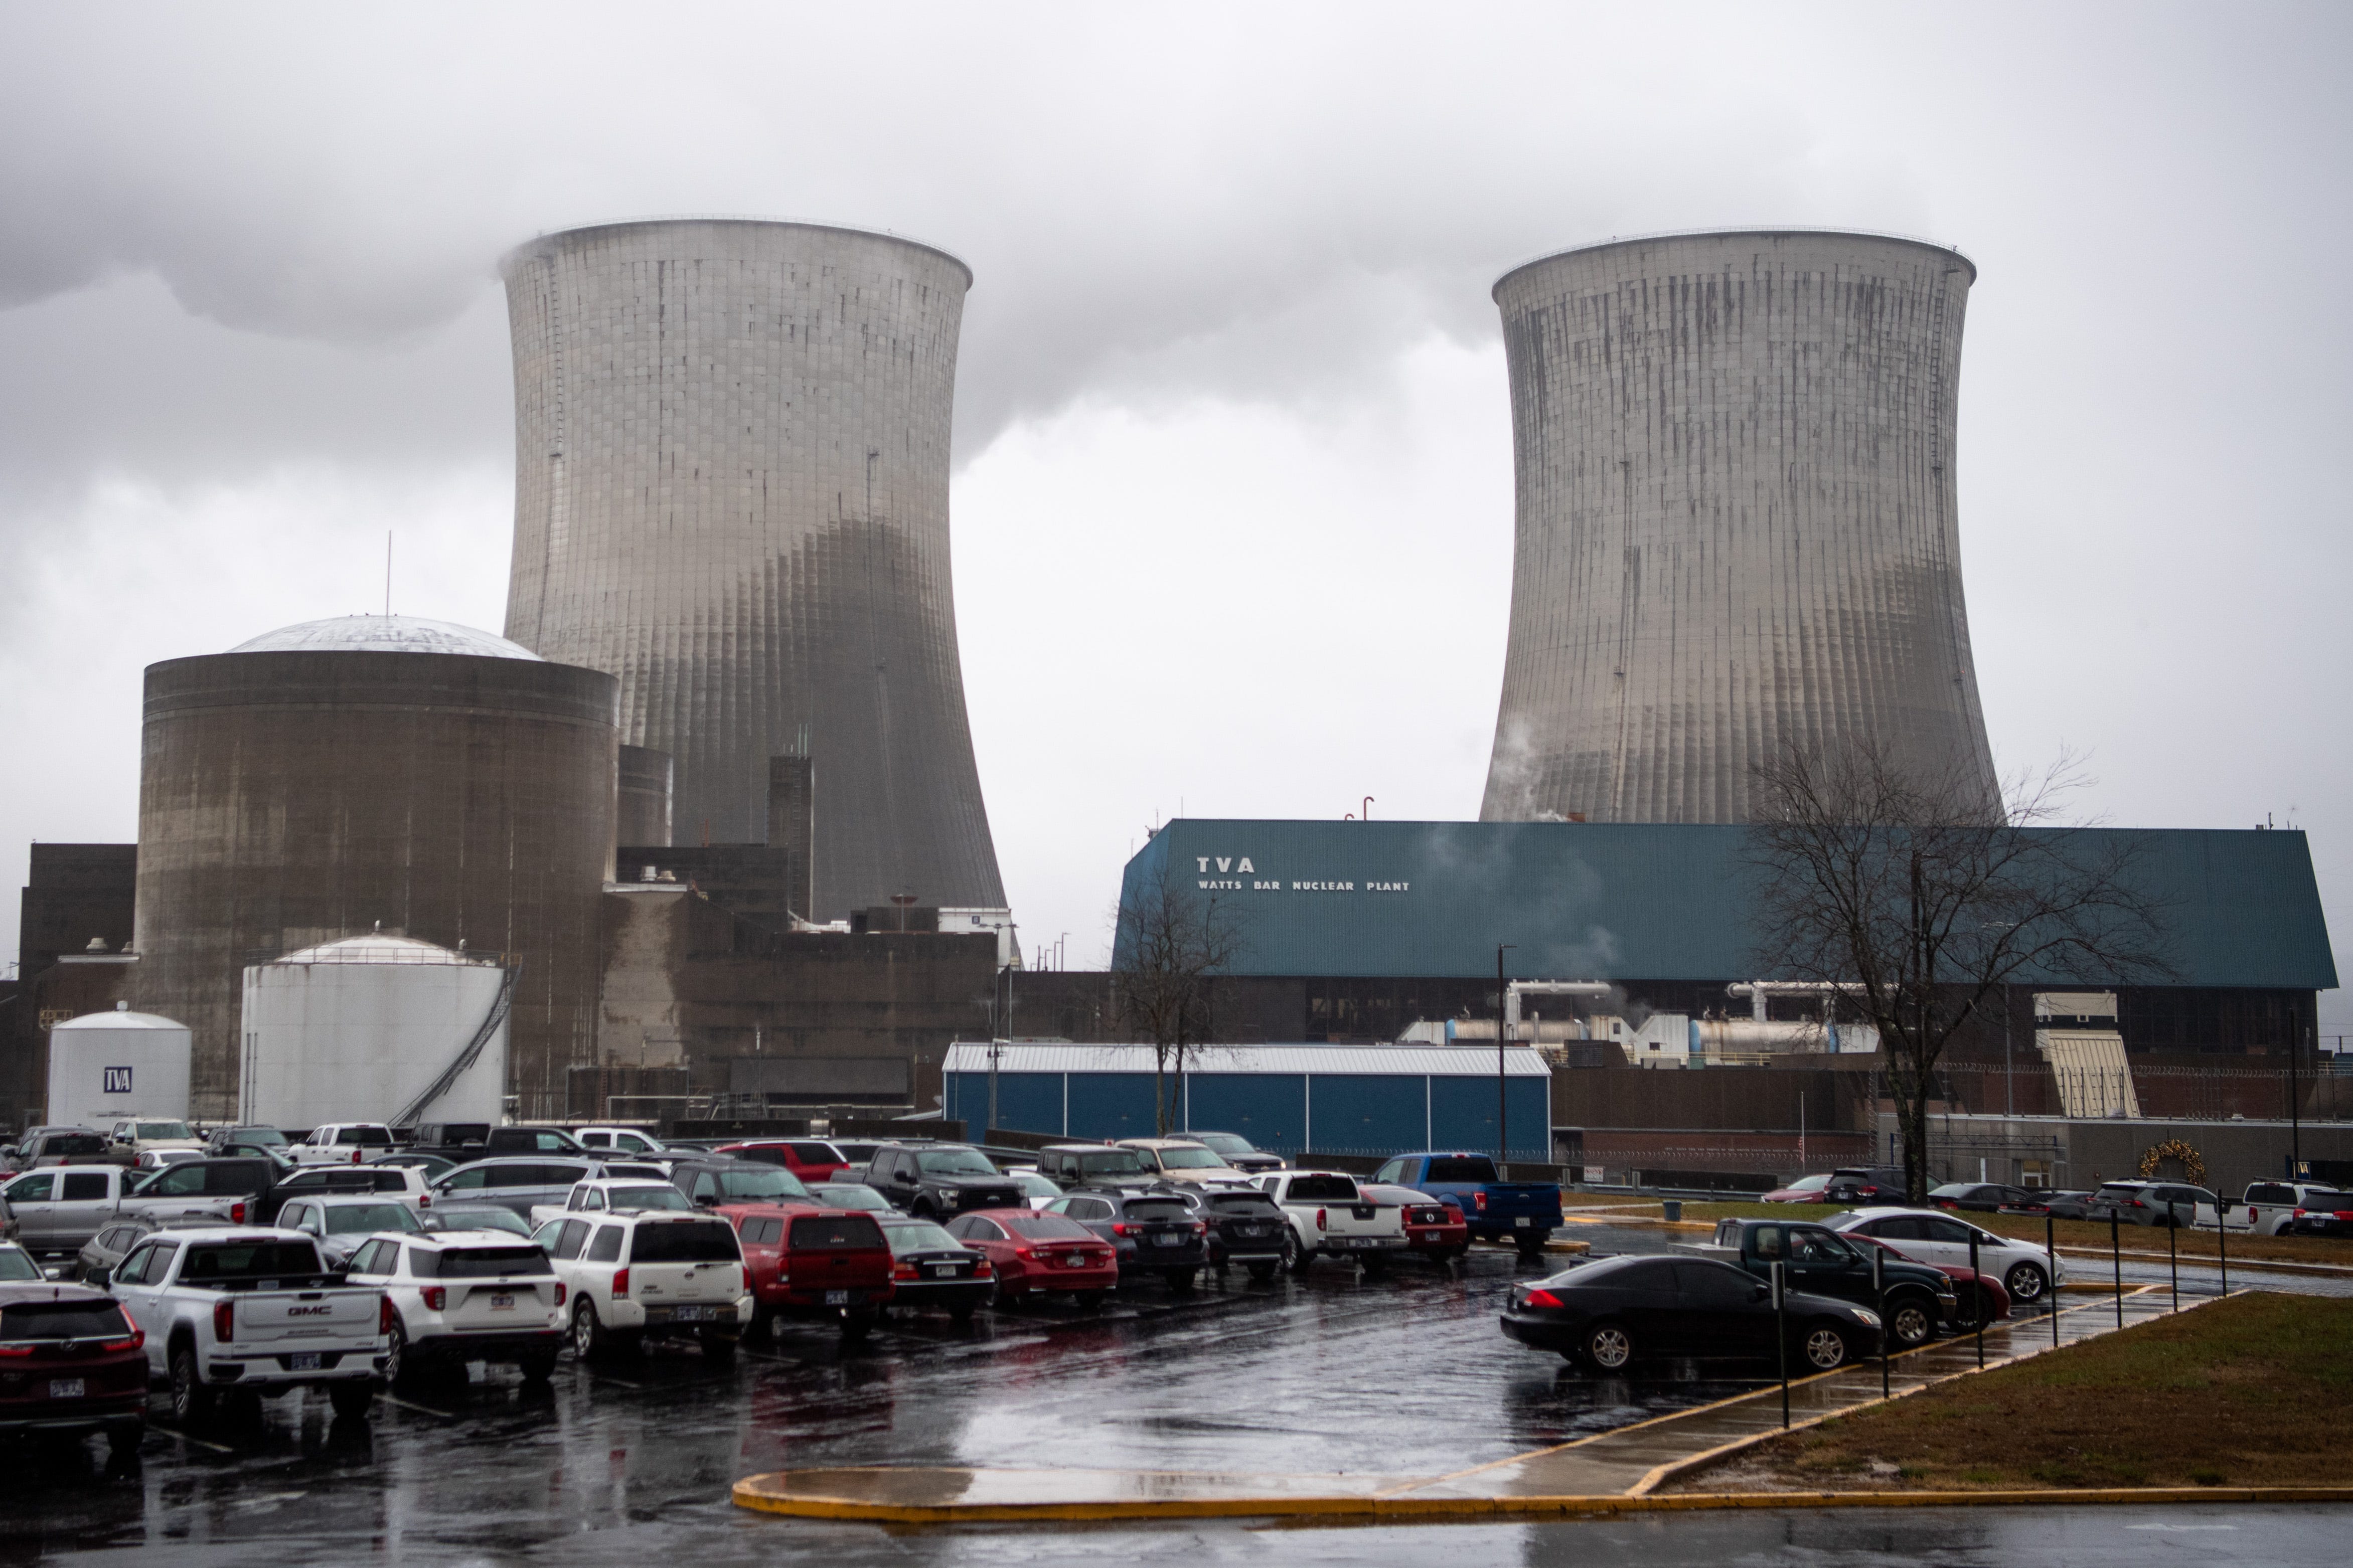 Watts Bar is one of three nuclear powerplants TVA has on the grid. Nuclear generated electricity throughout the December winter storm and was TVA's only power plant fleet that did not experience interruptions.